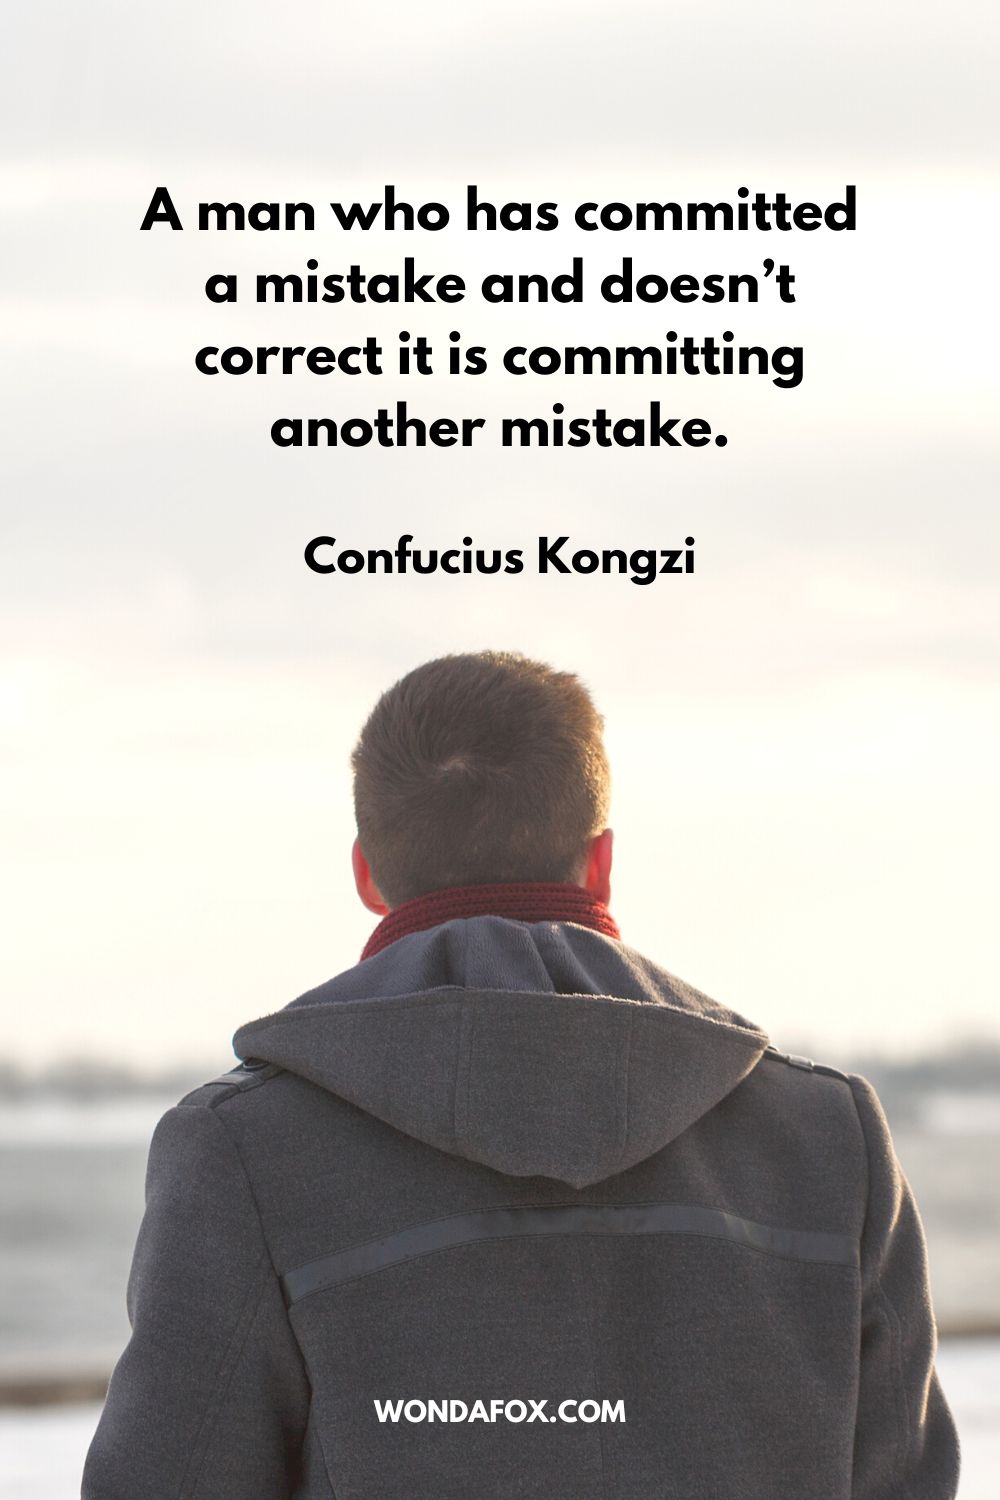 A man who has committed a mistake and doesn’t correct it is committing another mistake. Confucius Kongzi